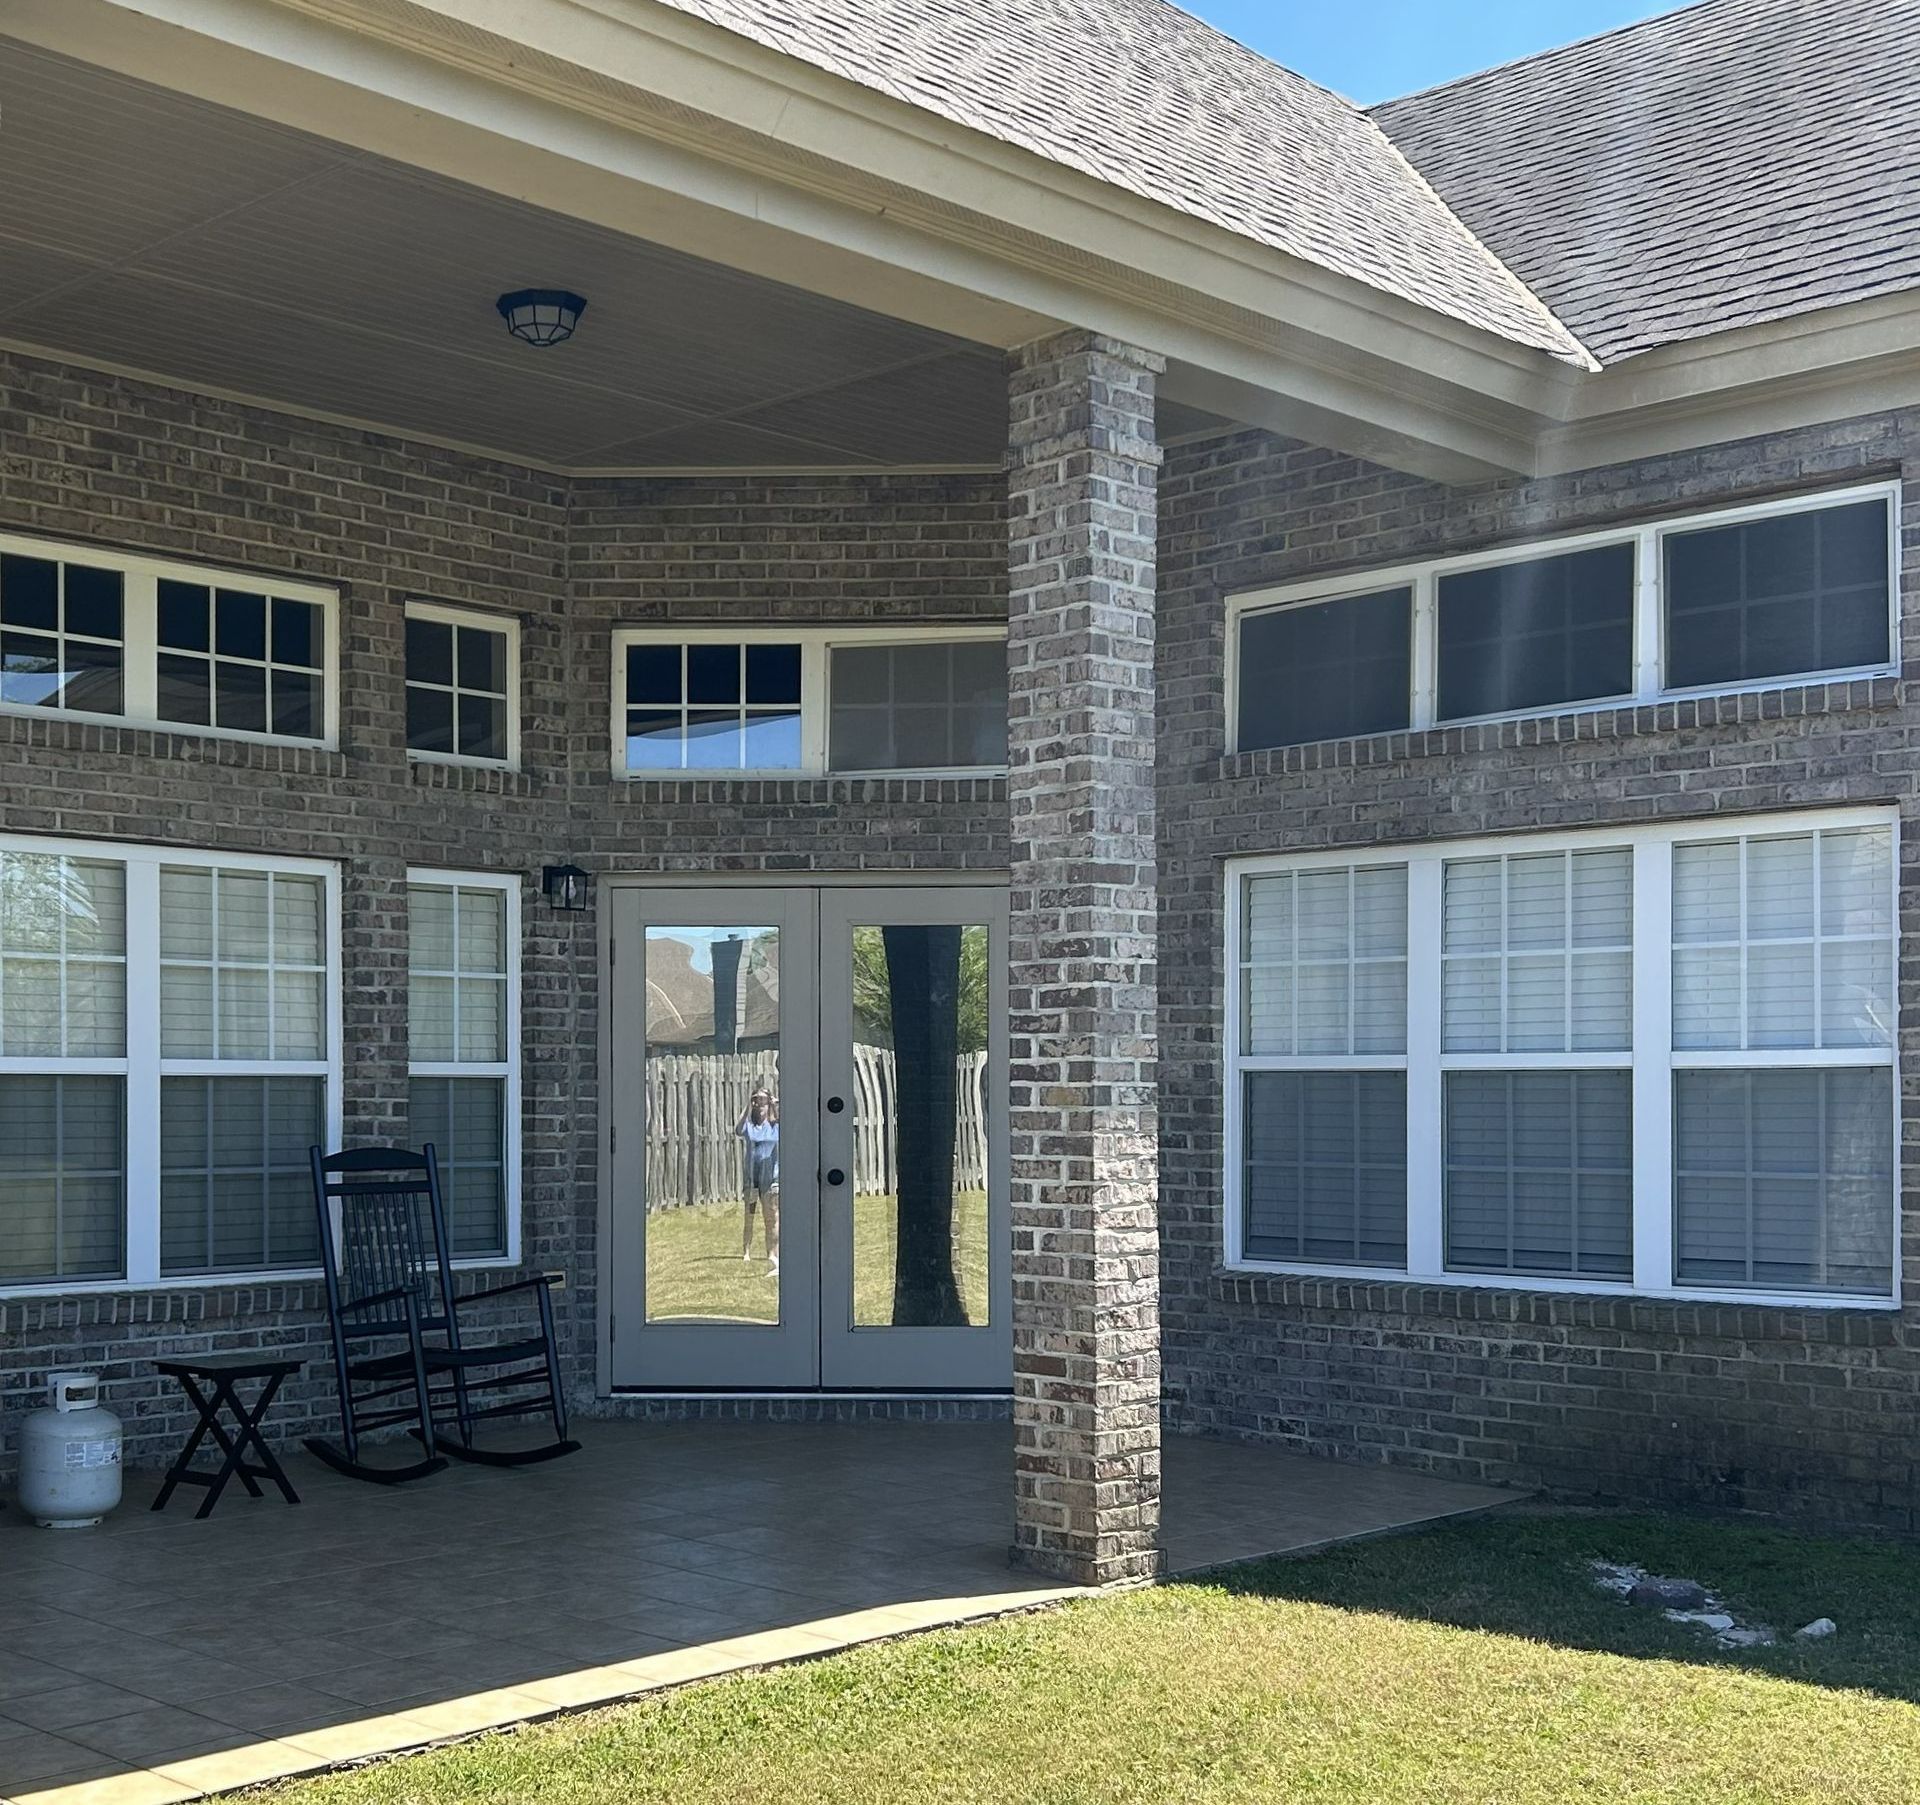 home window tinting in Deer Creek - Heat with aggravatingly bright UV Sunlight has been blocked from the home transom windows. Deer Creek in Montgomery AL